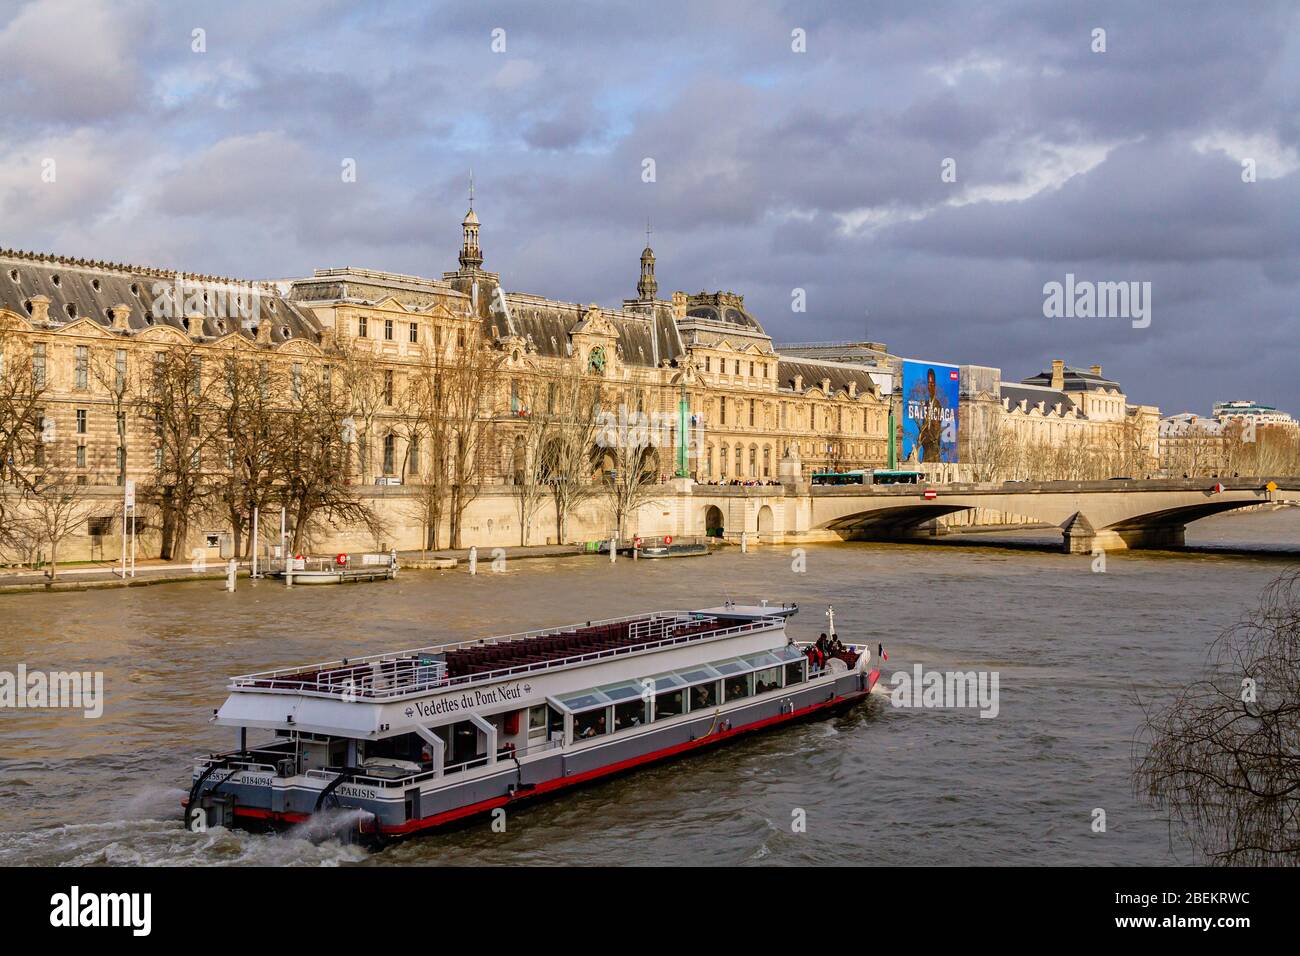 A Vedettes du Pont Neuf sightseeing boat on the River Seine, passing the Louvre in Paris, France. February 2020. Stock Photo